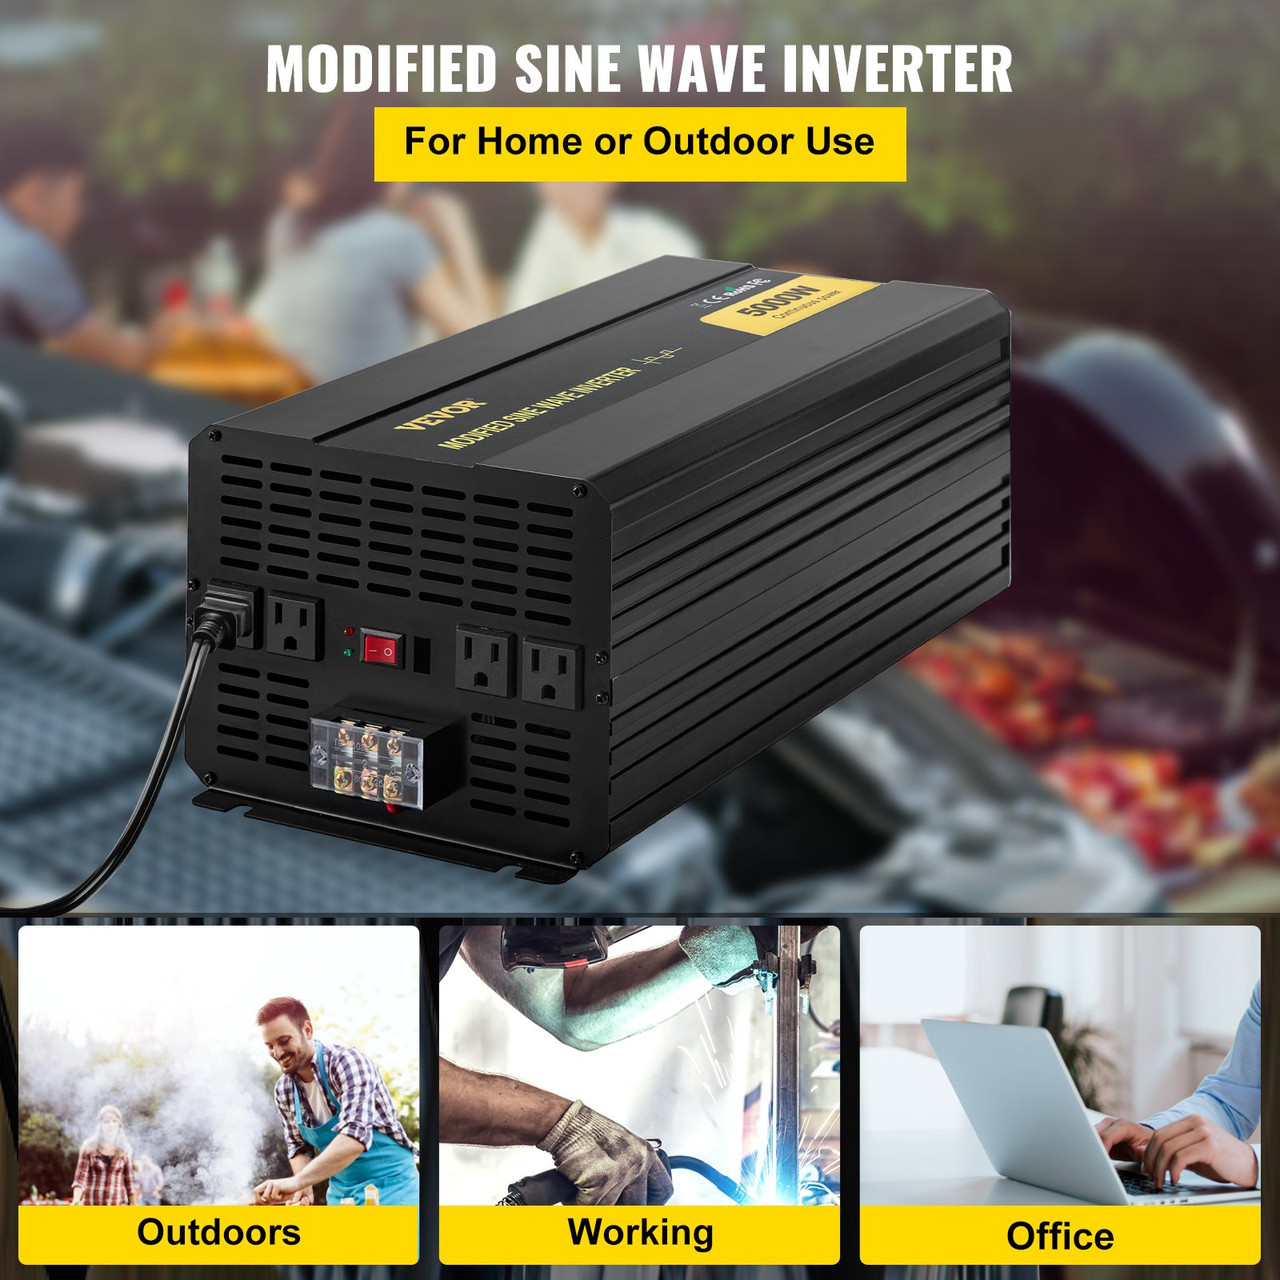 Power Inverter, 5000W Modified Sine Wave Inverter, DC 24V to AC 120V Car Converter, with LCD Remote Controller, LED Indicator, AC Outlets Inverter for Truck RV Car Boat Travel Camping Emergency